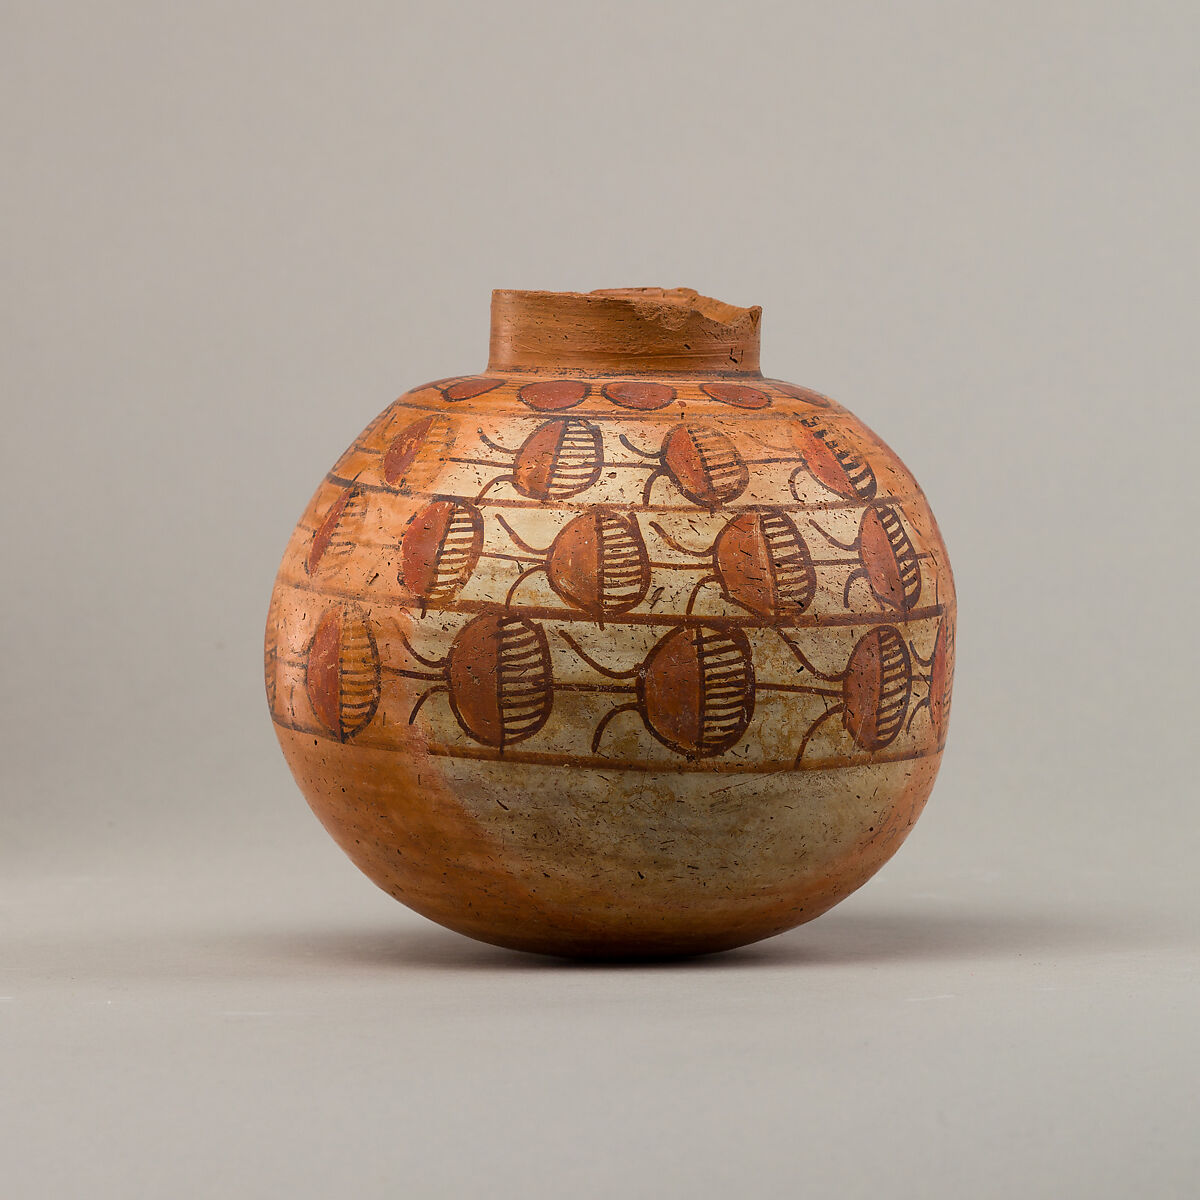 Spherical jar with four rows of painted decoration